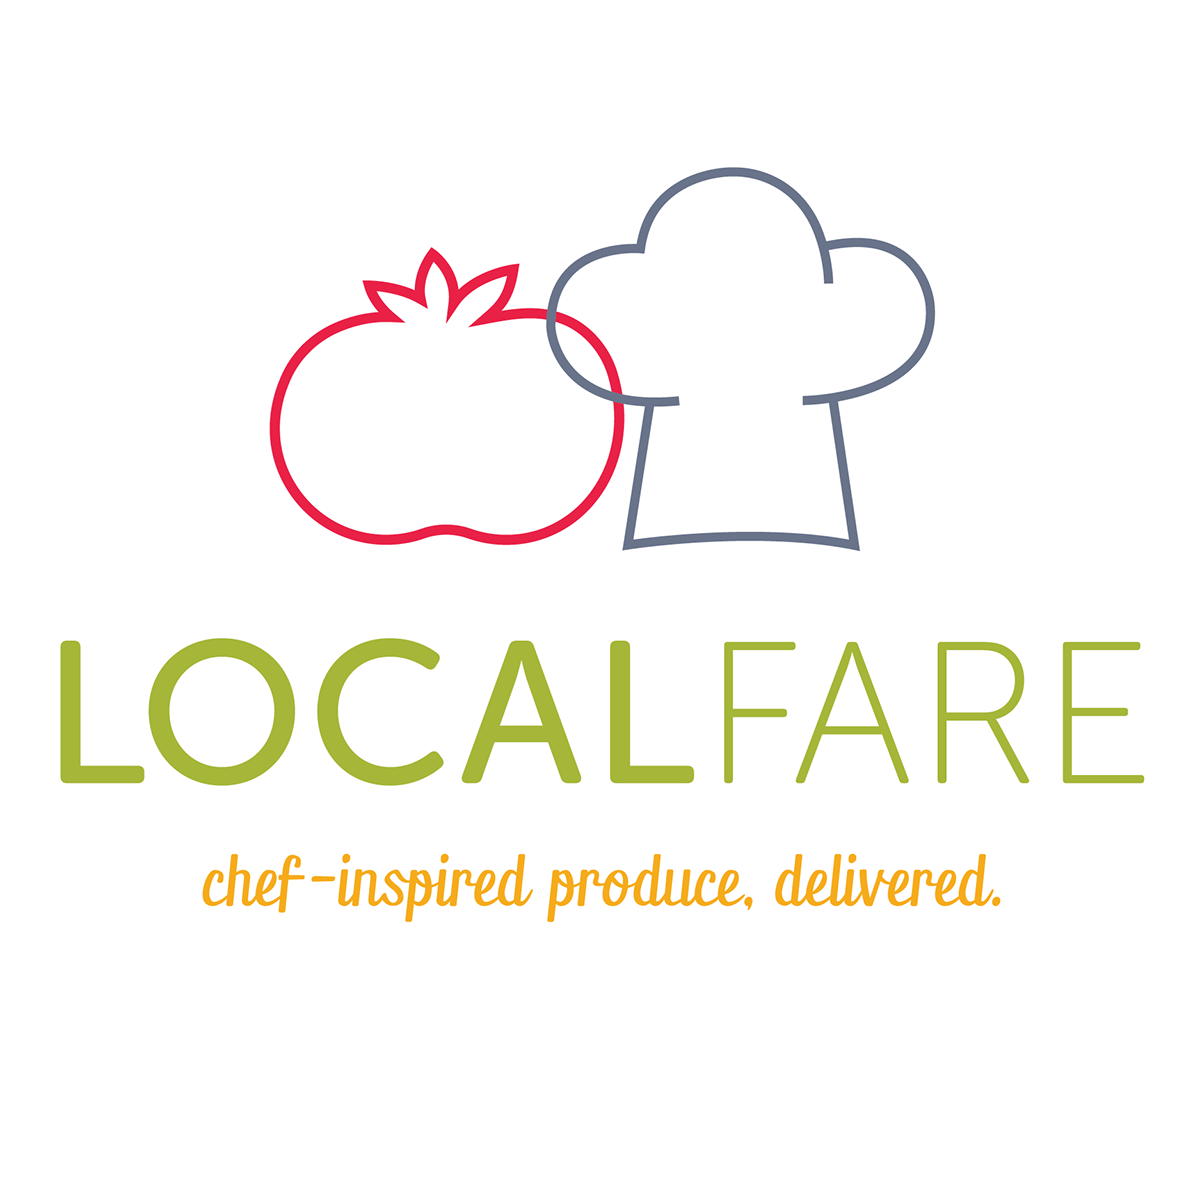 local fare brand manual Vegtables chef cooking